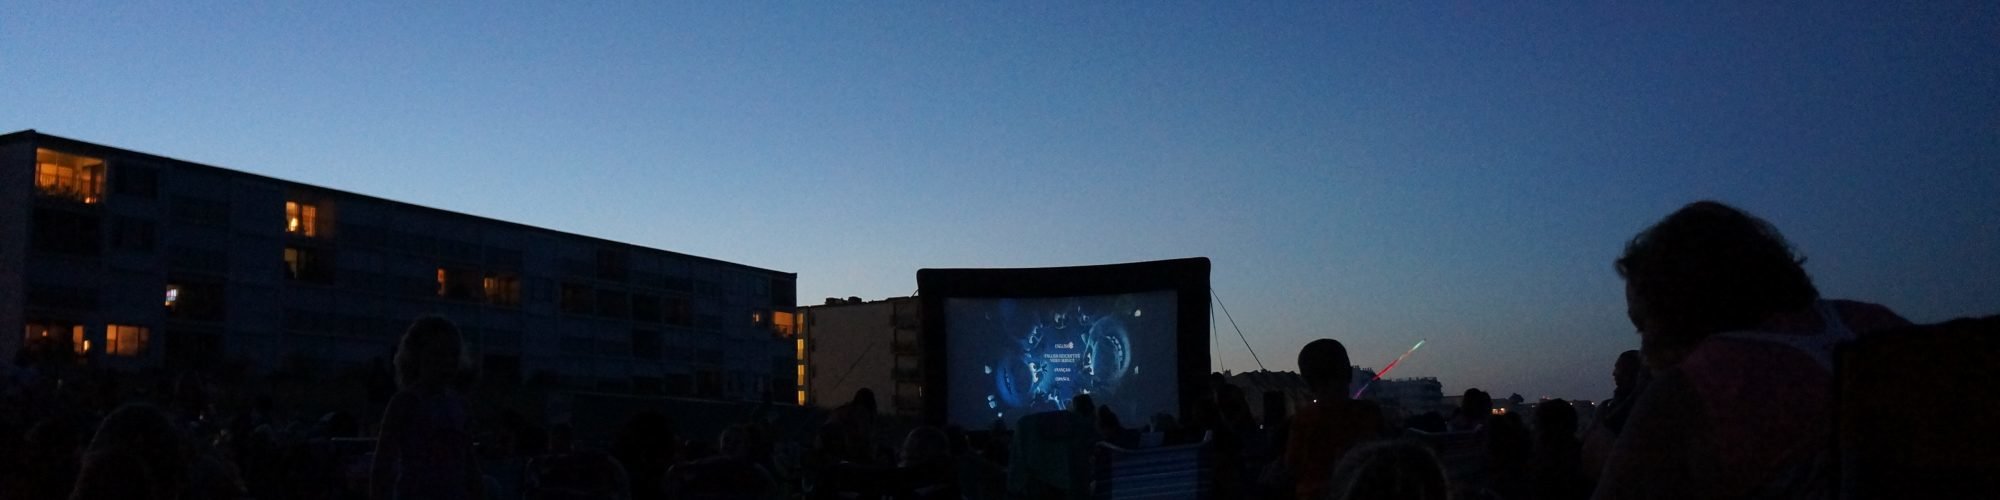 movie screen on the beach with people watching